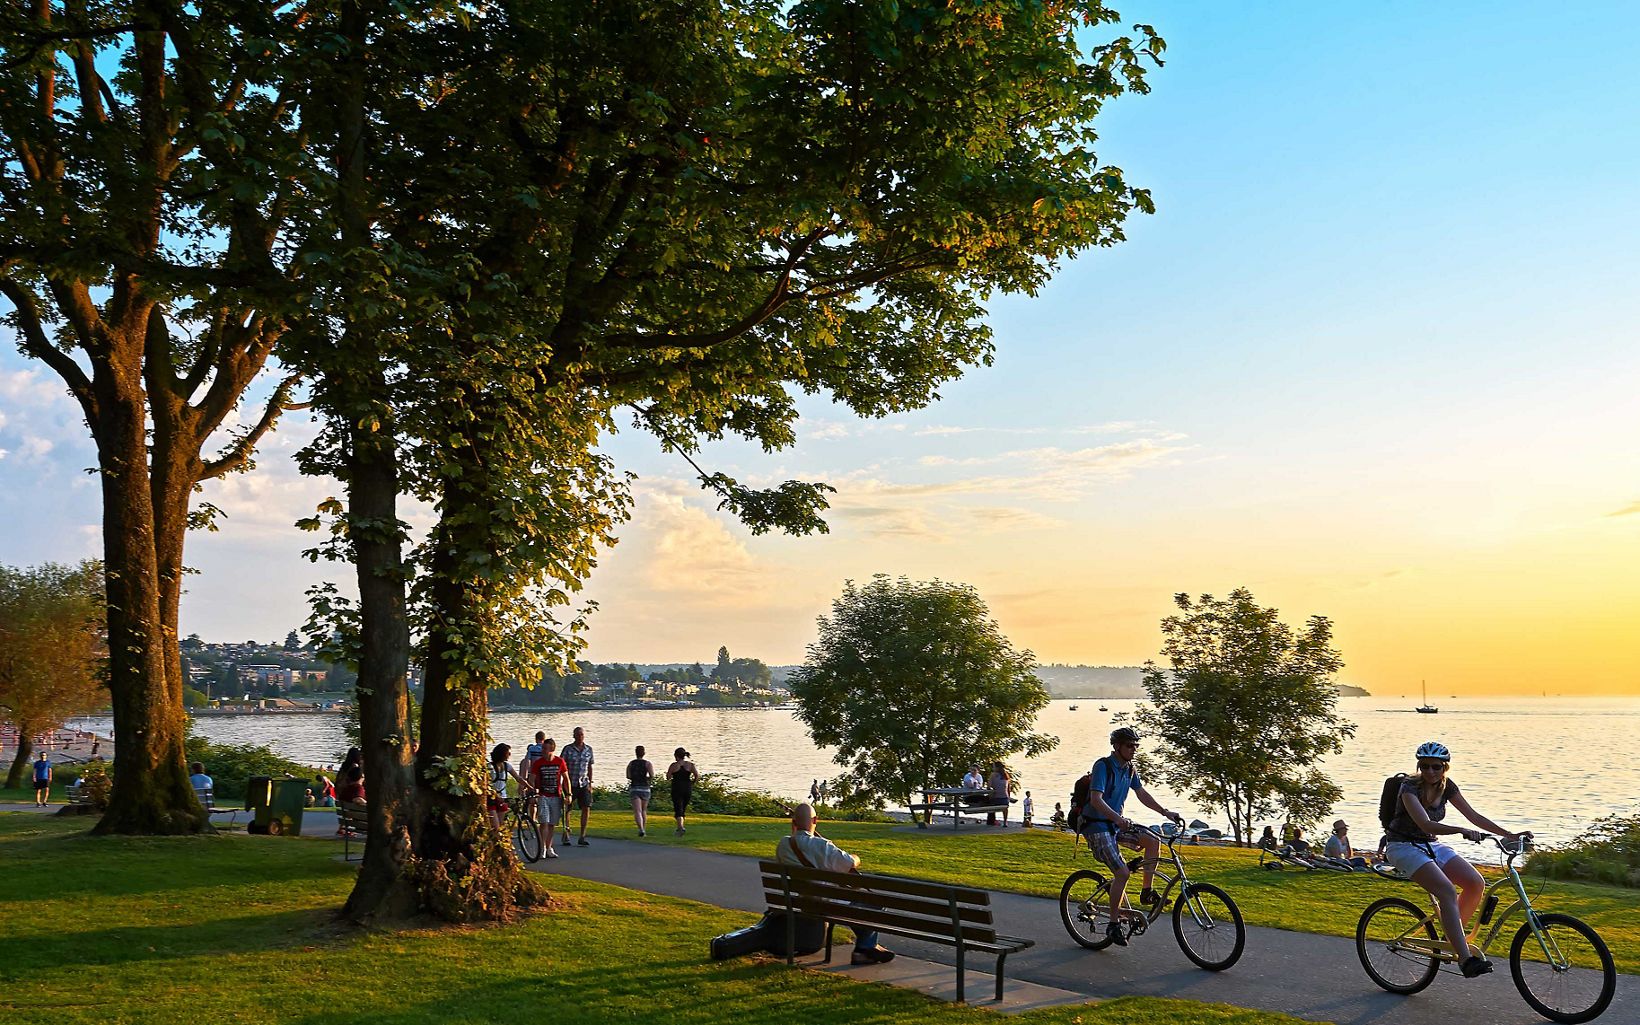 a sidewalk by the water in Vancouver with people walking and biking under the shade of trees